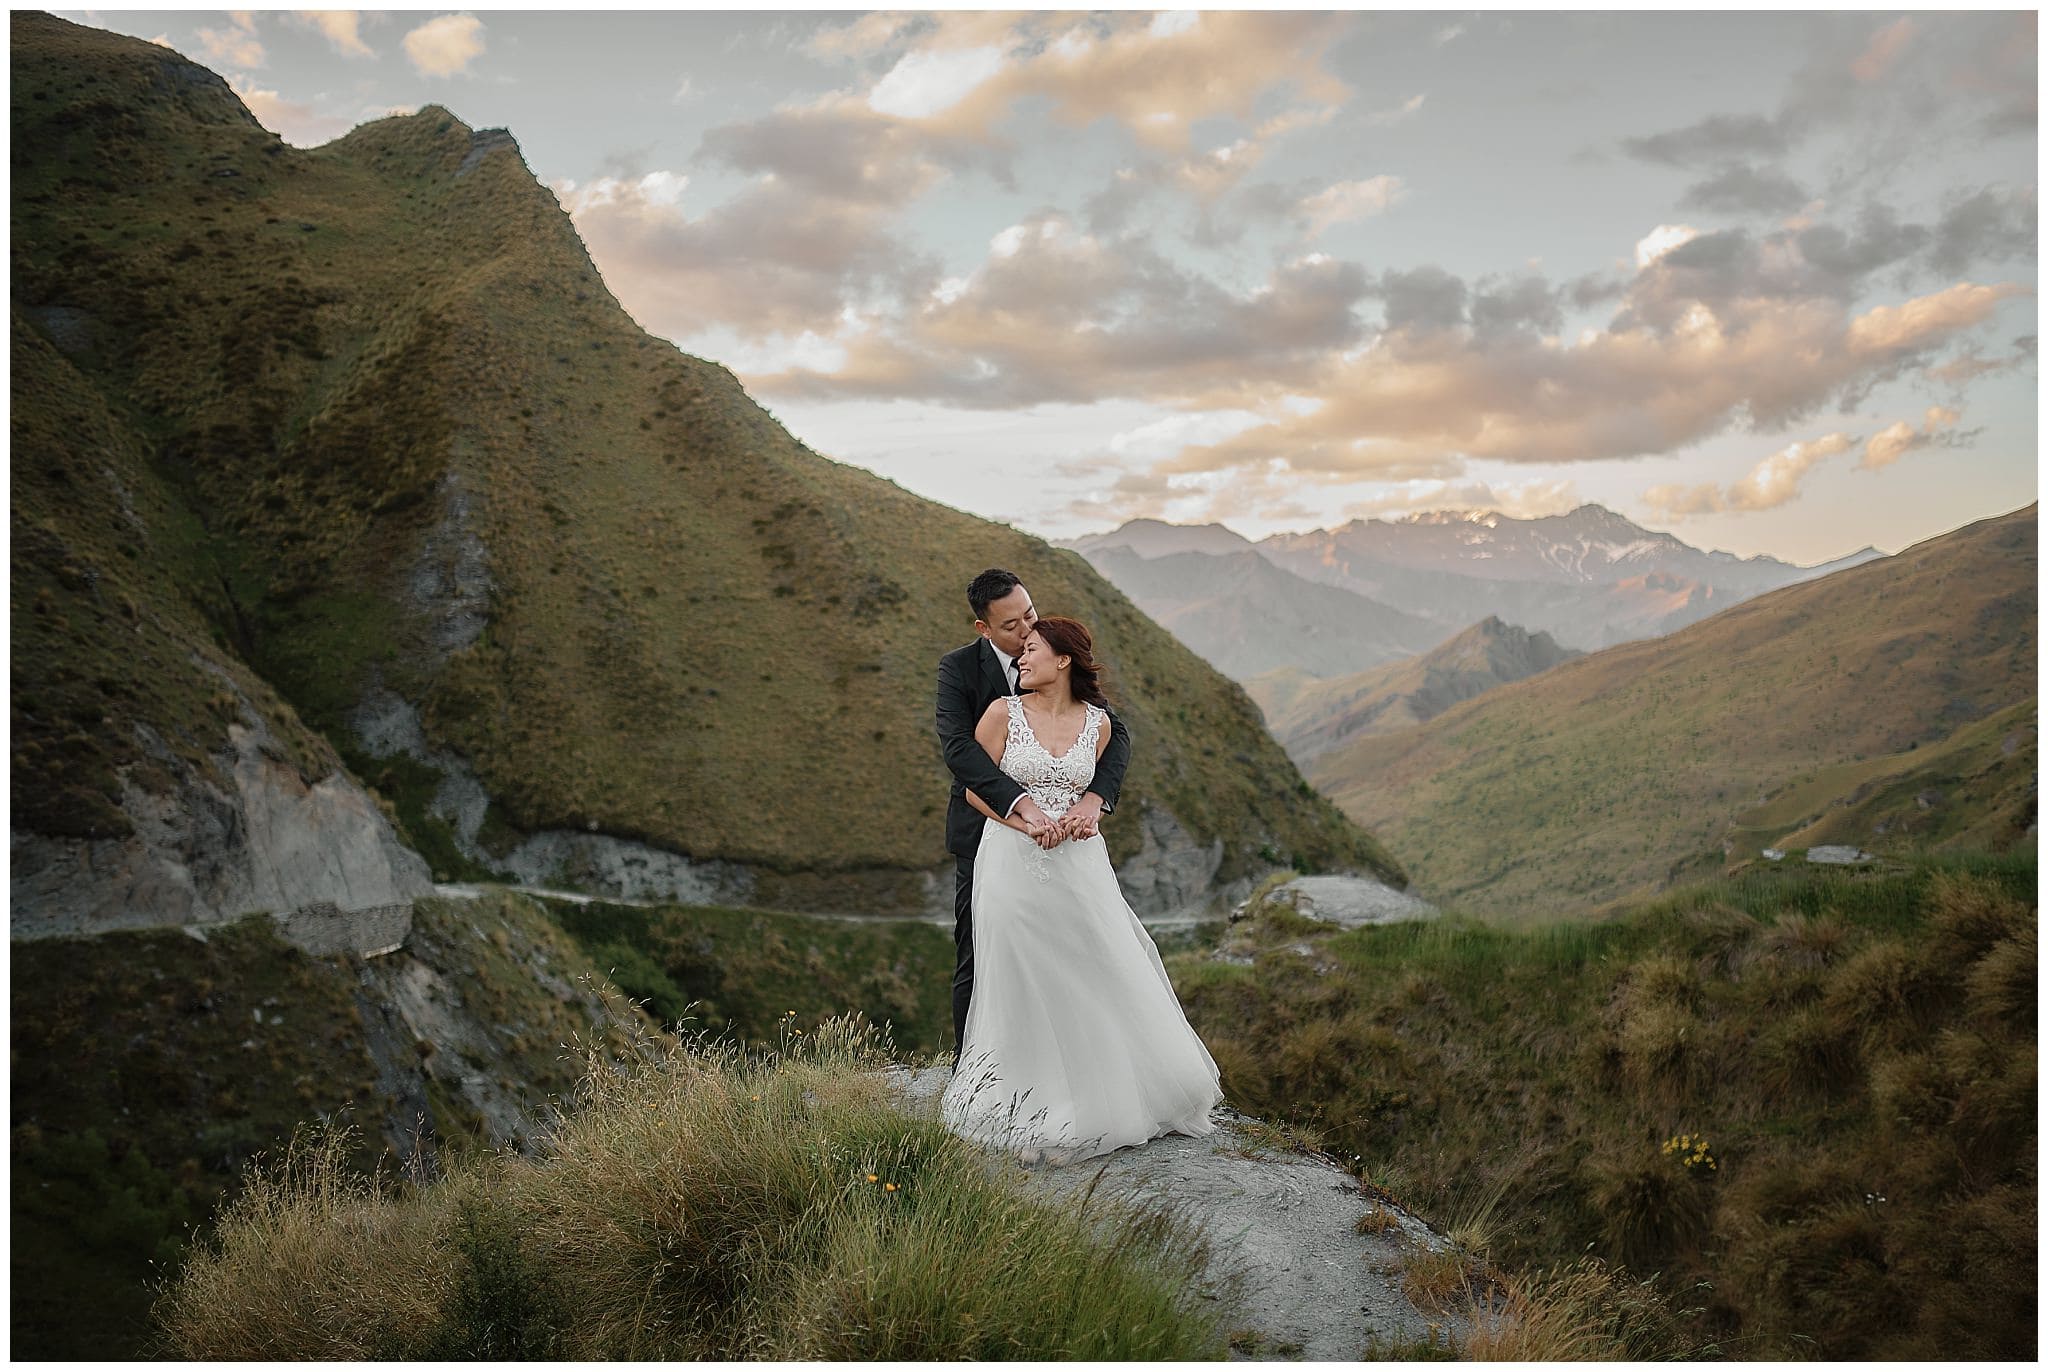 Kit Ying & Mike's Queenstown NZ Pre-Wedding Shoot